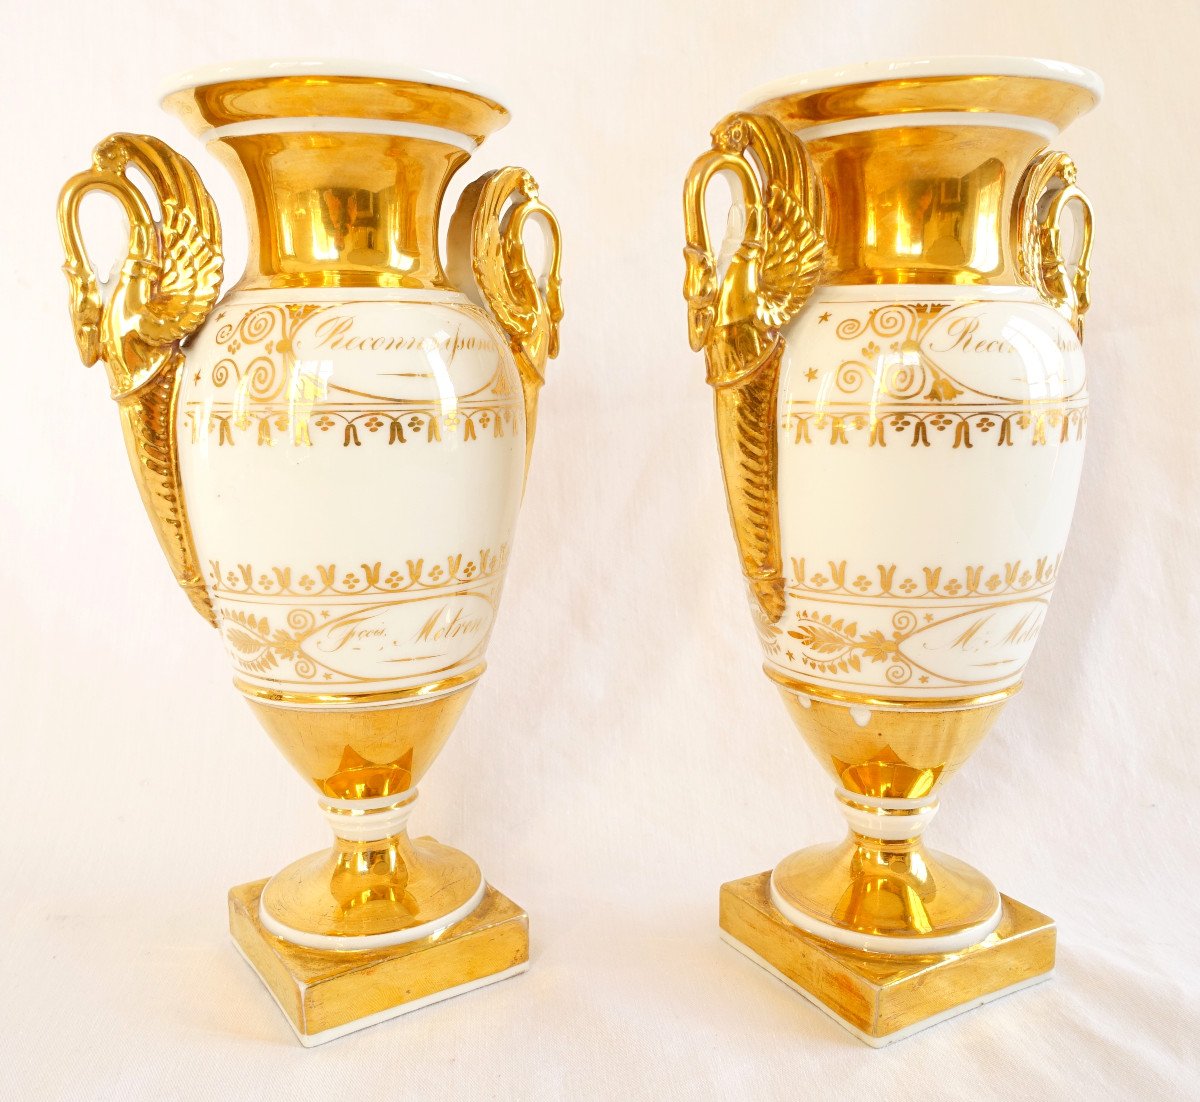 Pair Of Empire Paris Porcelain Vases Enhanced With Fine Gold, Early 19th Century-photo-3